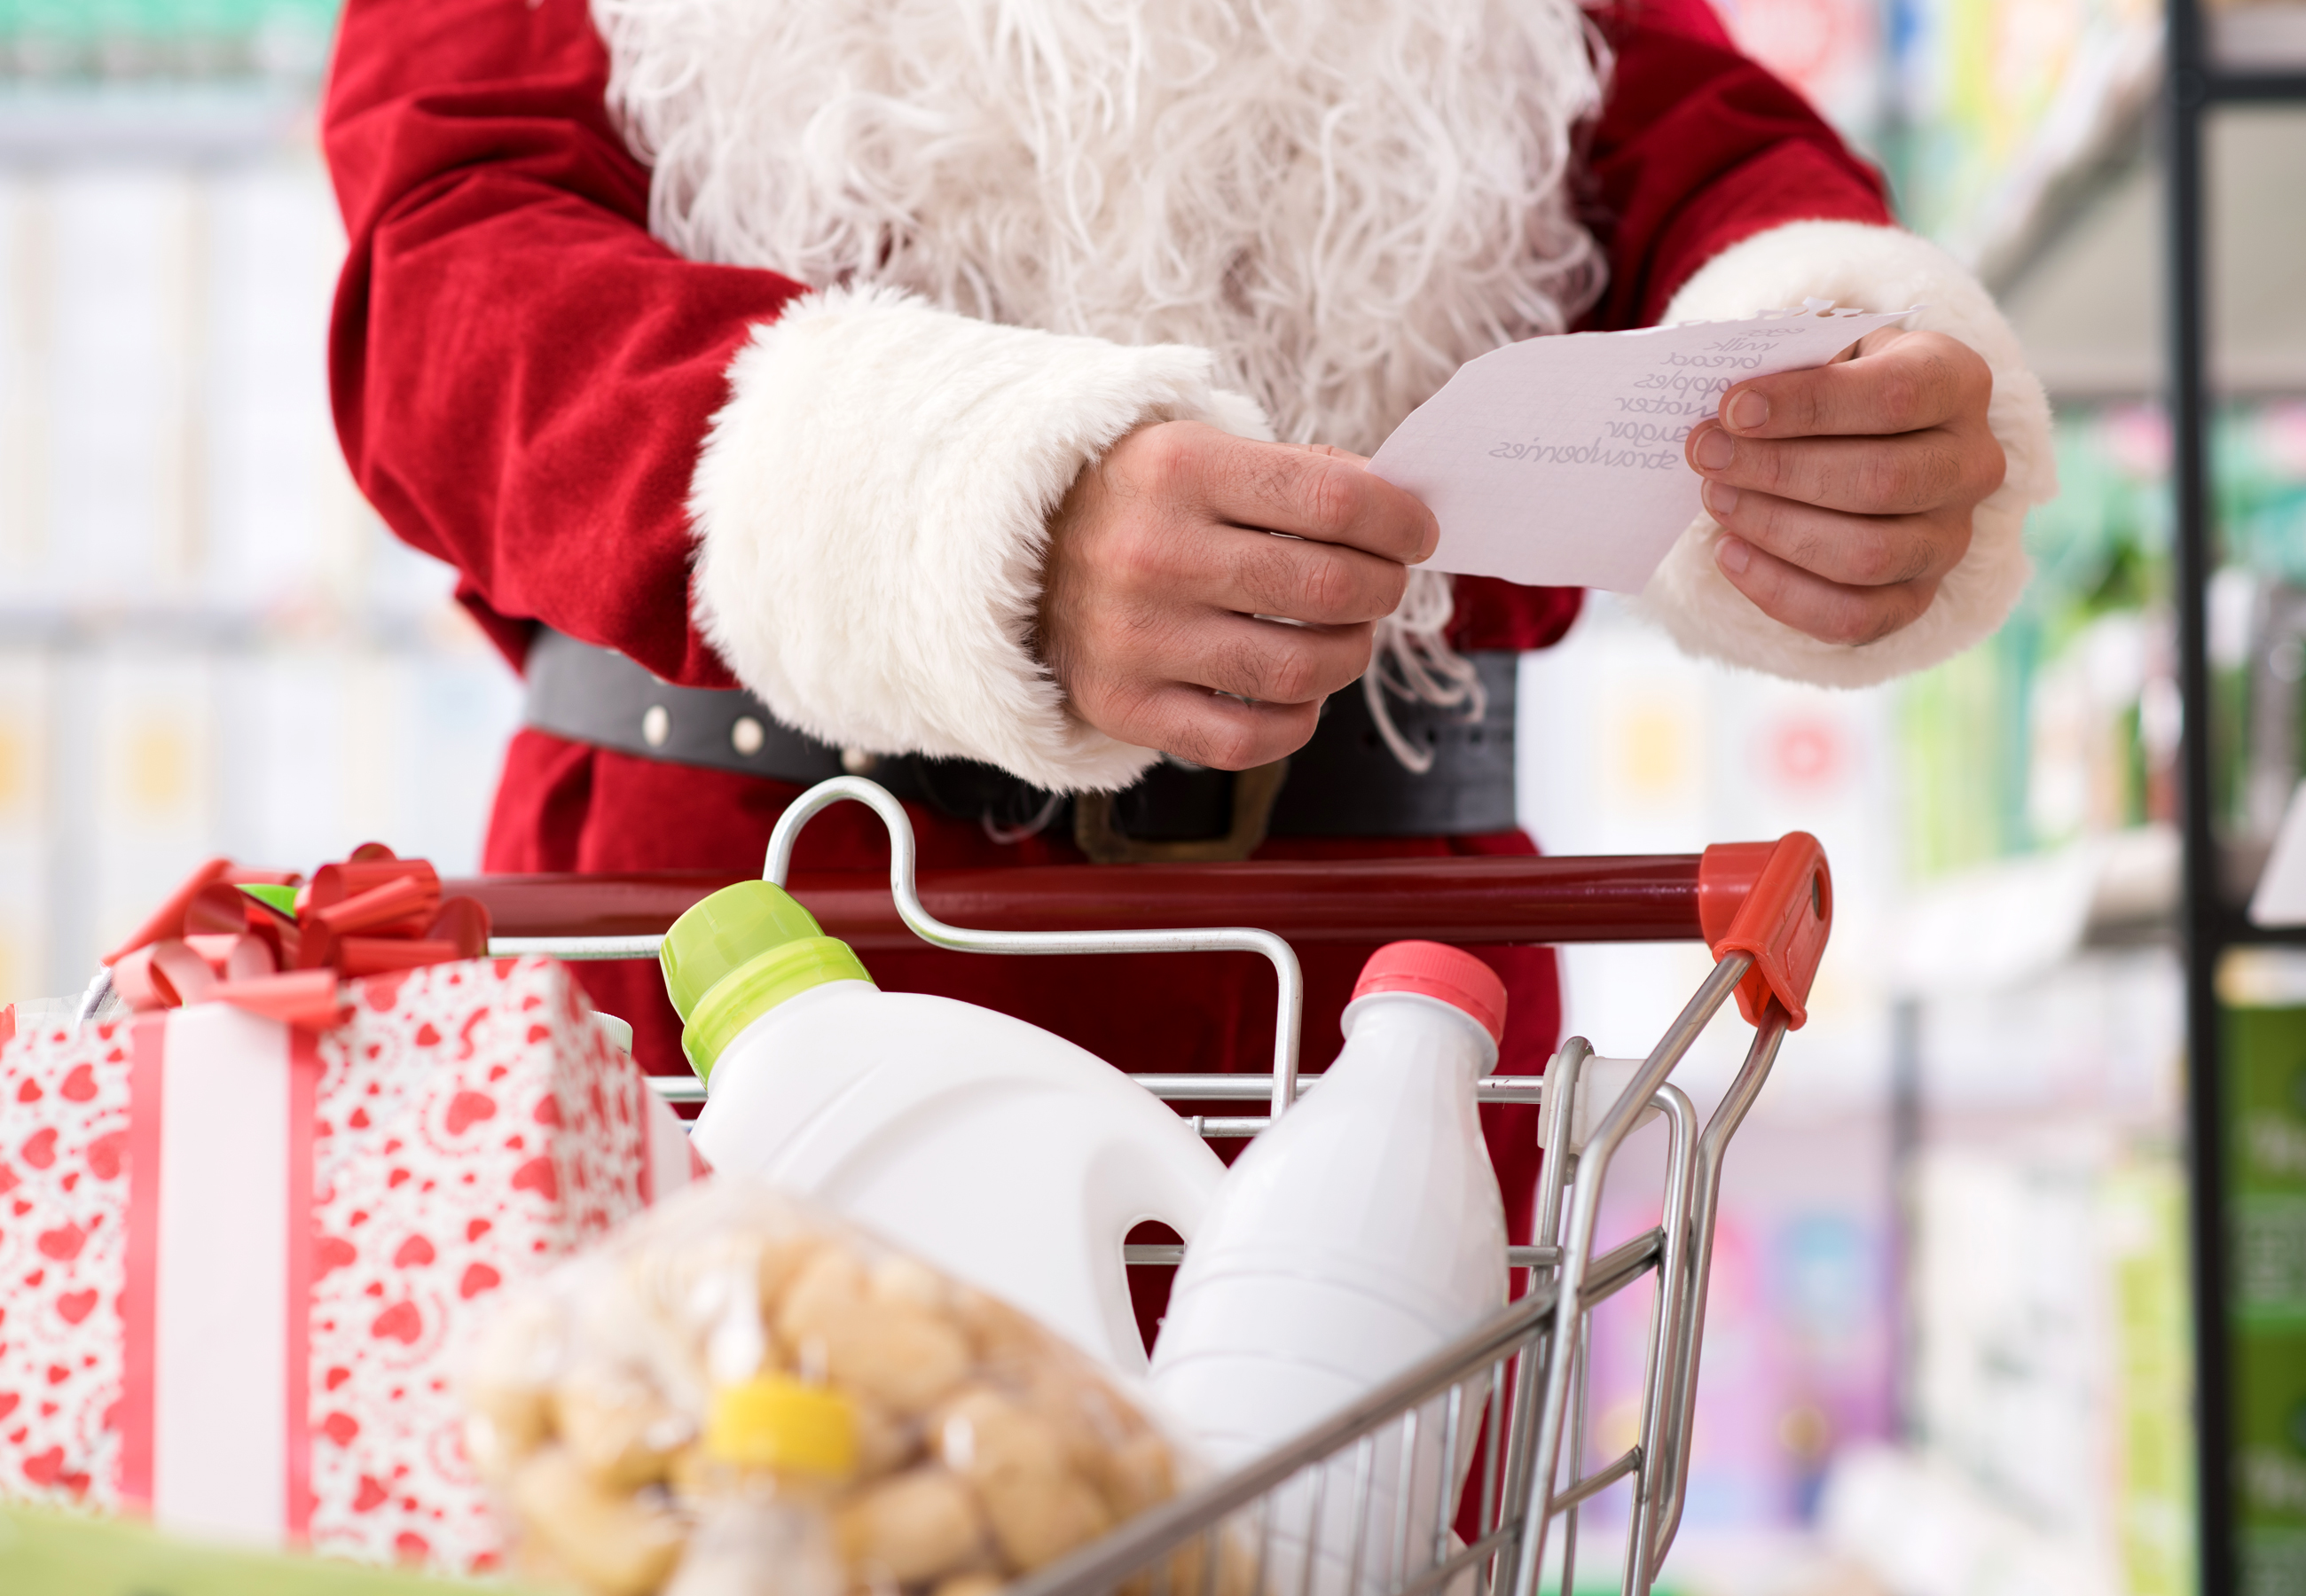 Here’s how emerging CPG brands can leverage data analytics to capitalize on holiday growth opportunities for seasonal sales lift.